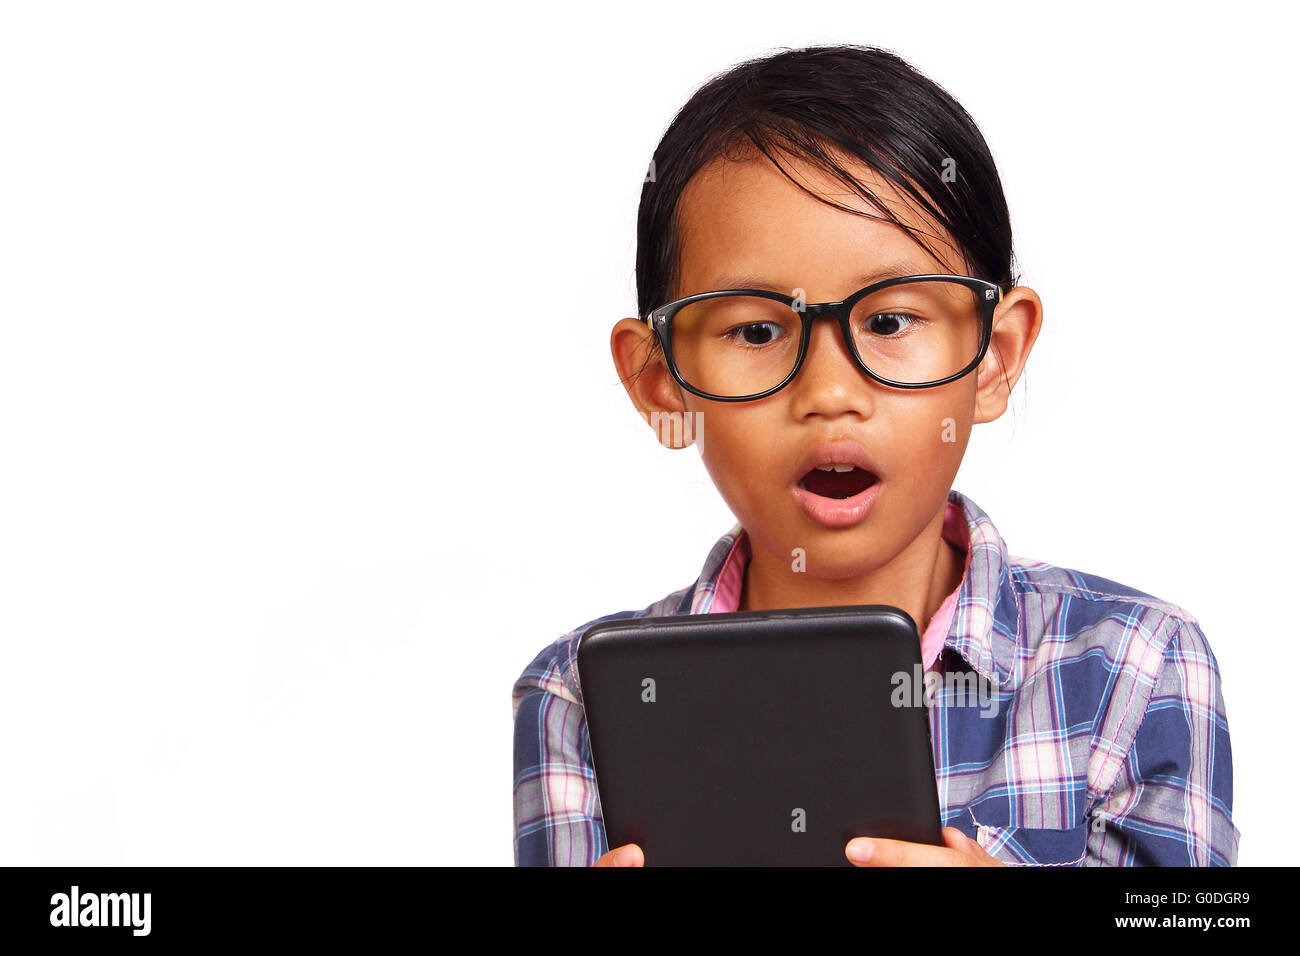 Little girl with glasses shocked while looking her tablet isolated on white Stock Photo